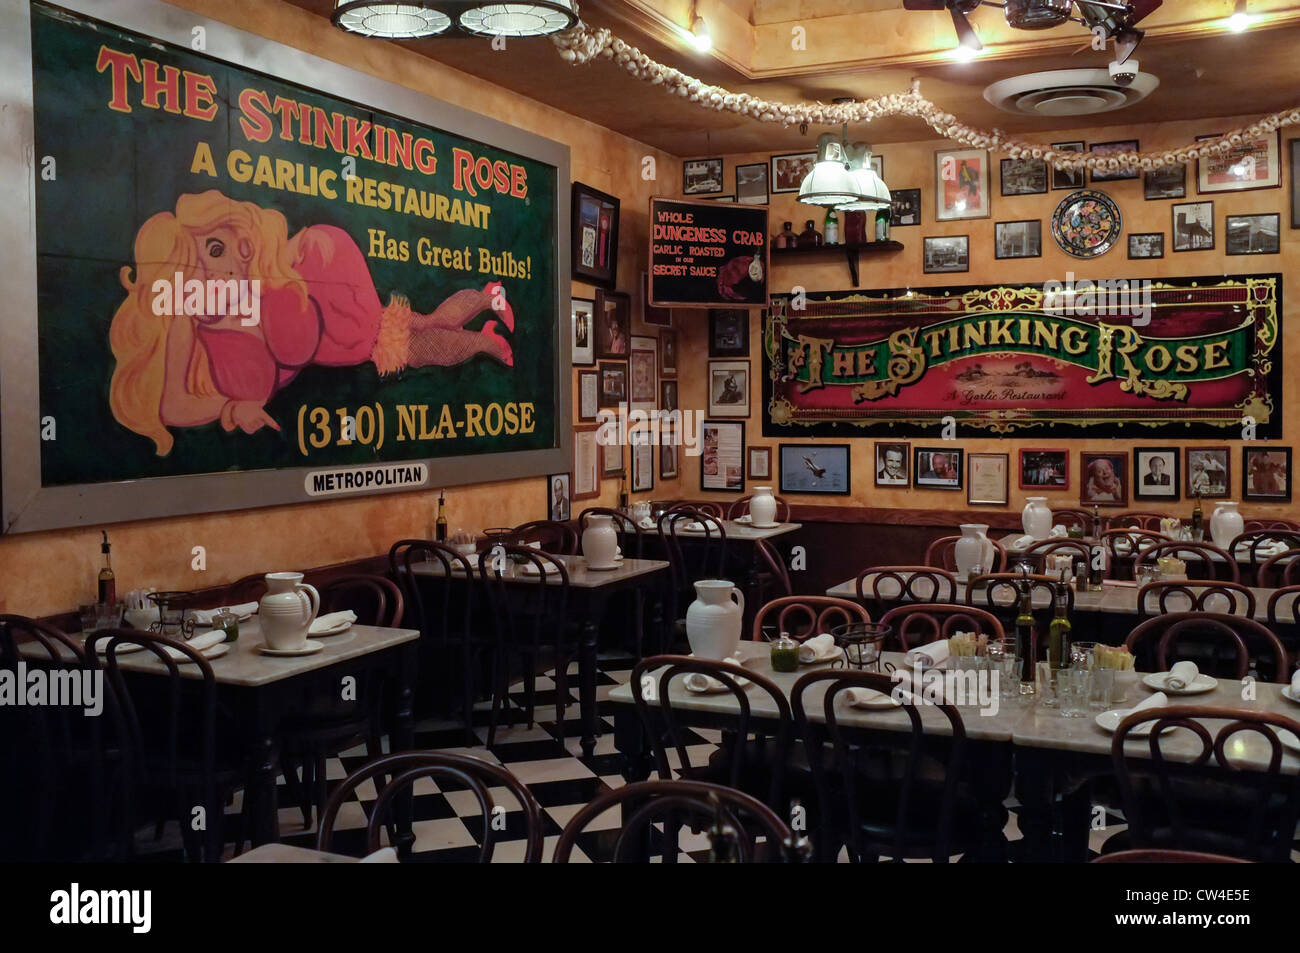 Interior of the Famous Stinking Rose Garlic Restaurant in San Francisco  Stock Photo - Alamy